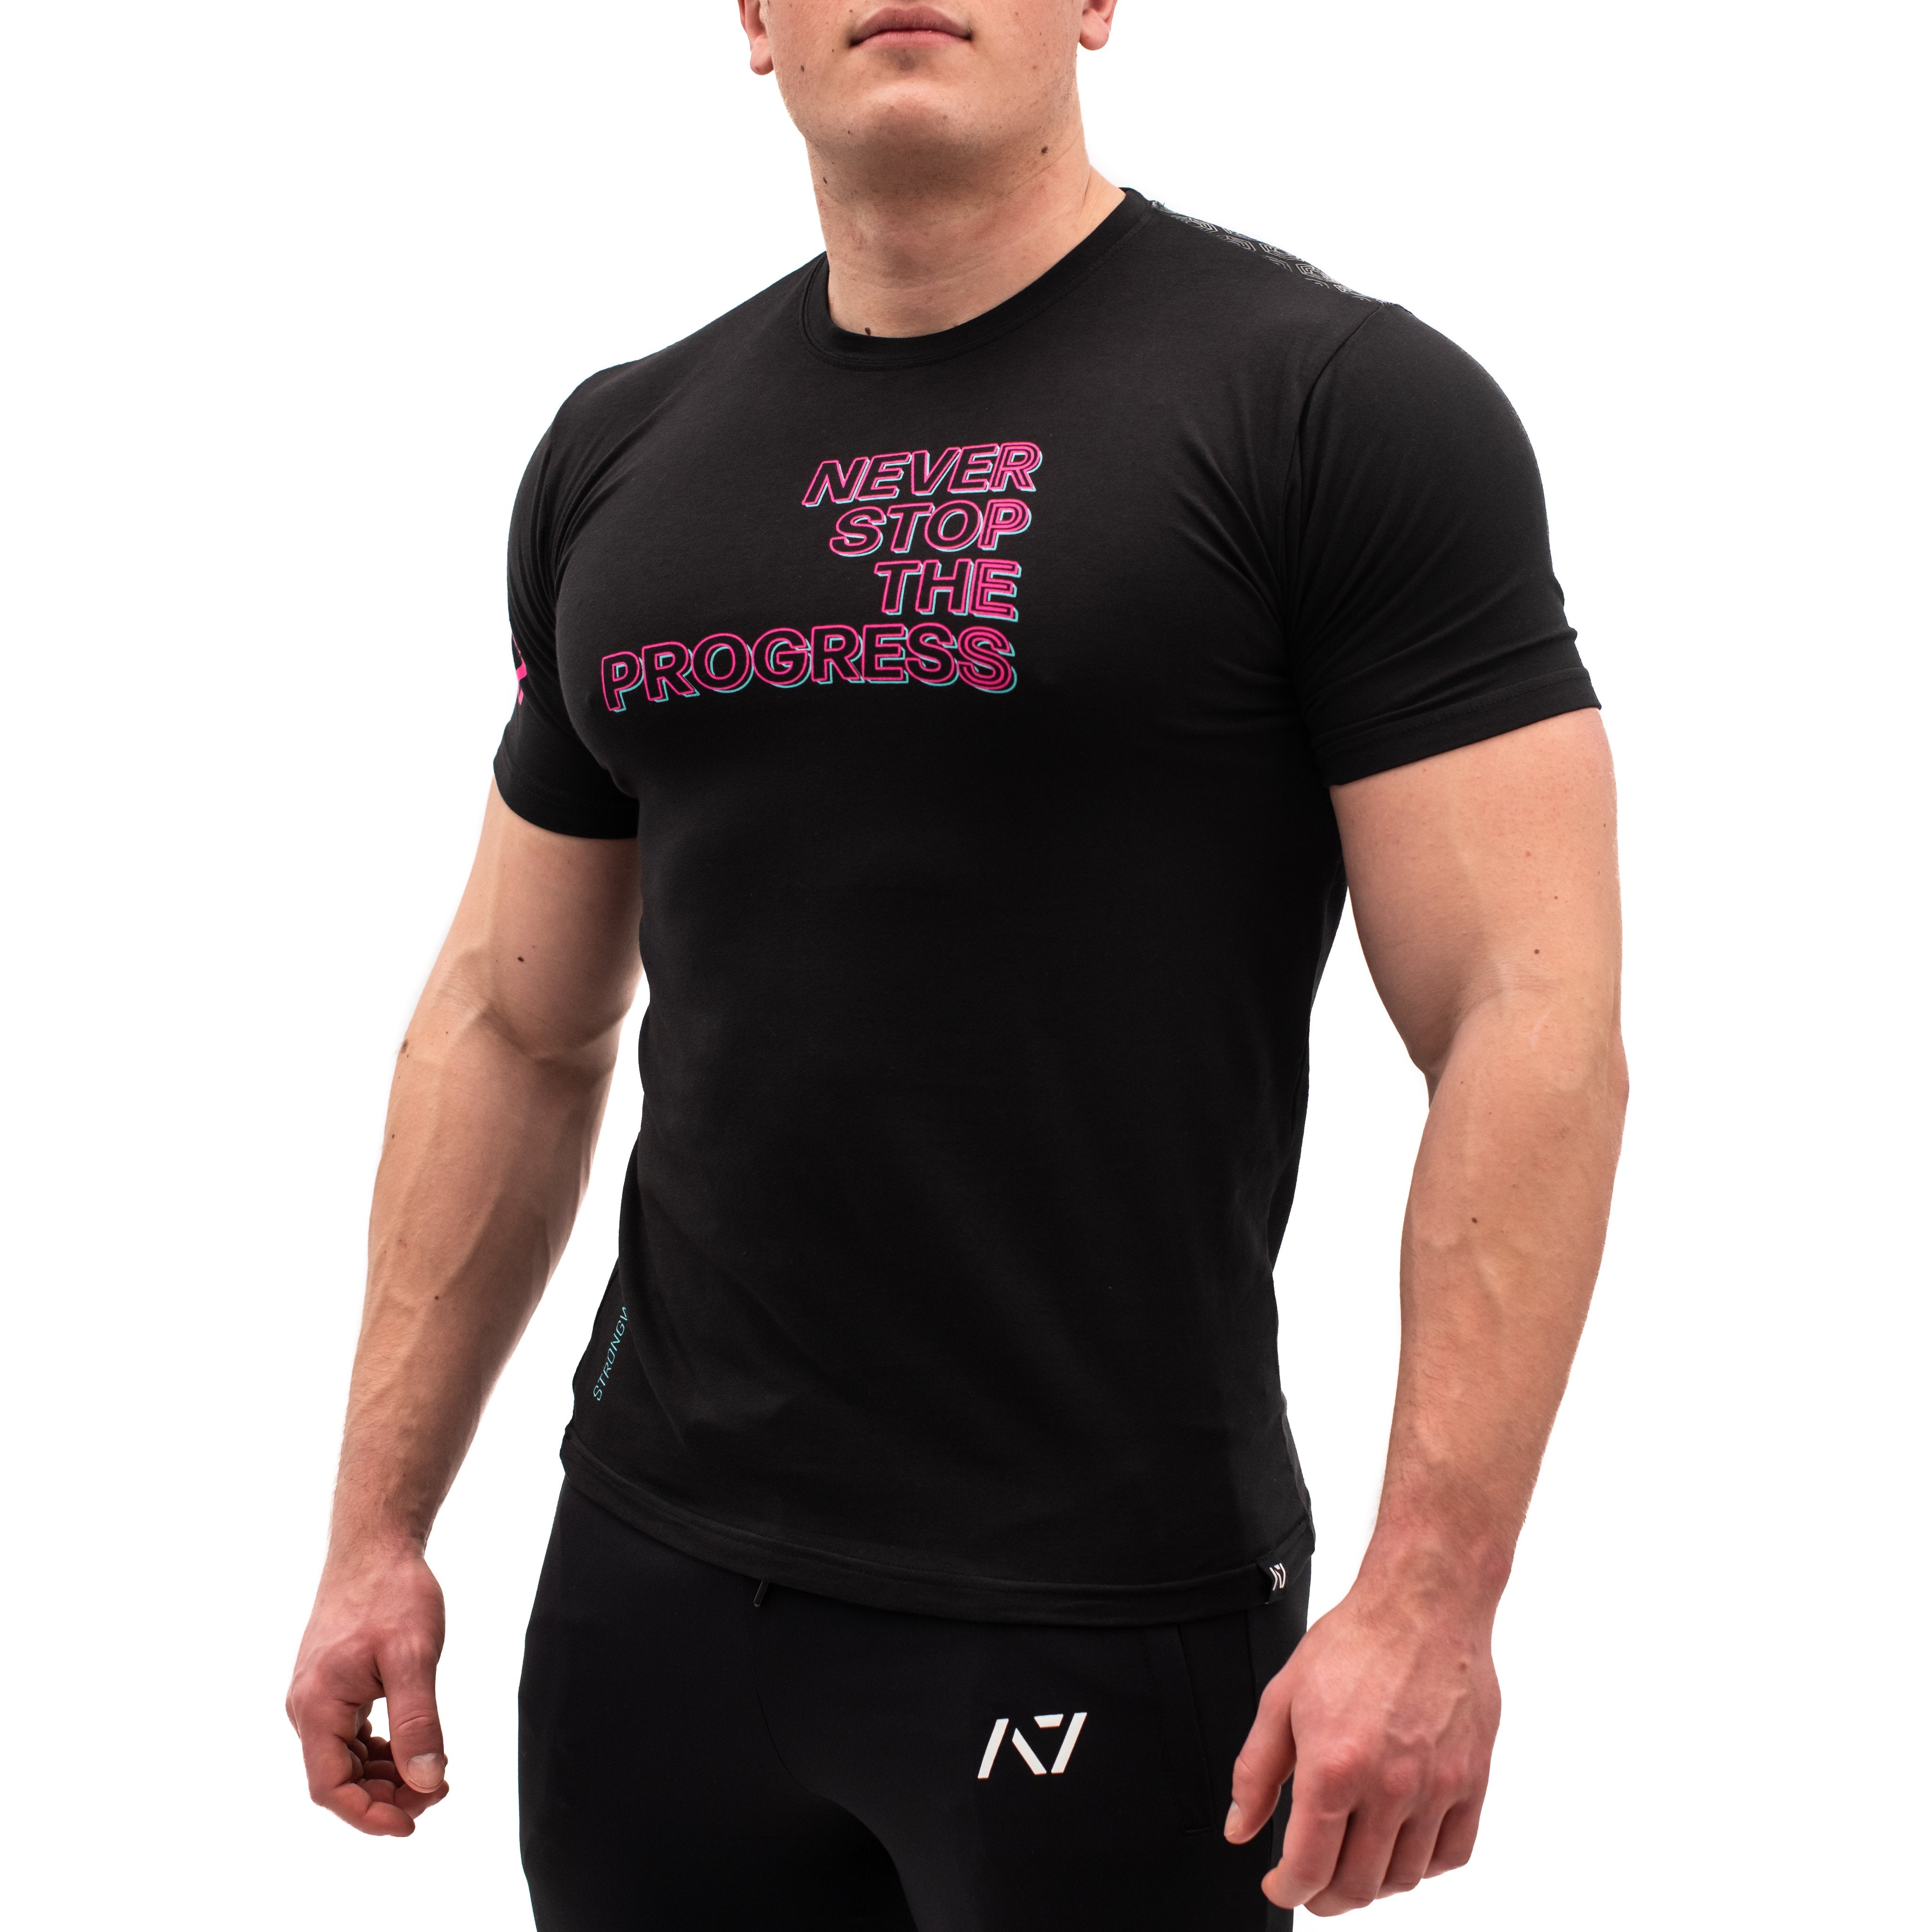 RPES Bar Grip T-shirt, great as a squat shirt. Purchase RPES Bar Grip tshirt UK from A7 UK. Purchase RPES Bar Grip Shirt in Europe from A7 UK. No more chalk and no more sliding. Best Bar Grip Tshirts, shipping to UK and Europe from A7 UK. RPES is our classic black on black shirt design! The best Powerlifting apparel for all your workouts. Available in UK and Europe including France, Italy, Germany, Sweden and Poland